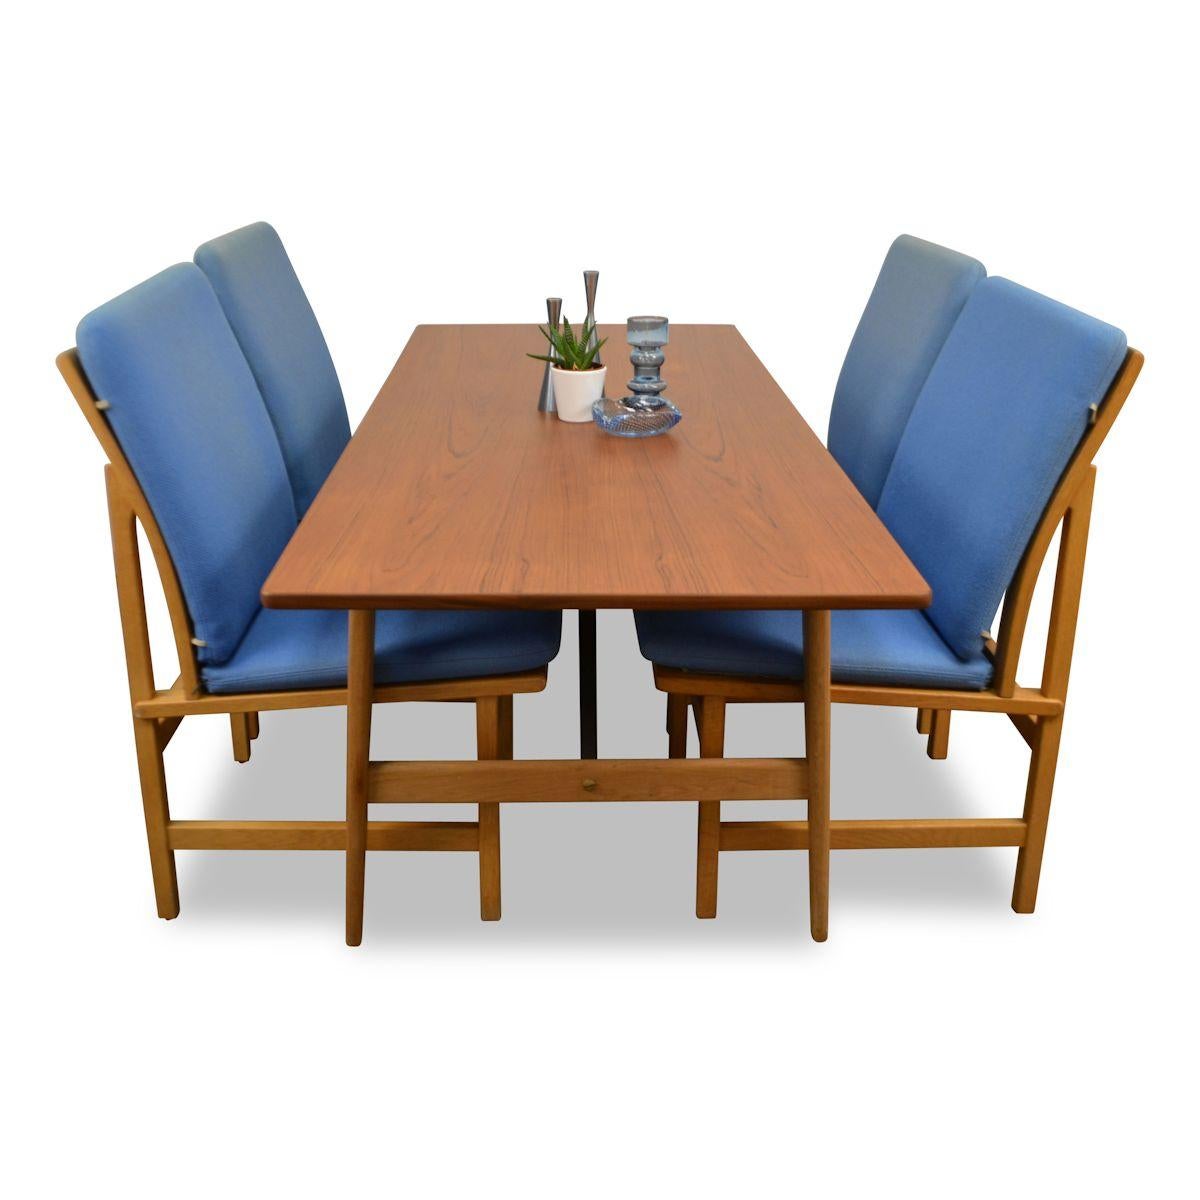 Rare vintage Danish teak/oak lounge dining set, consists of low dining table model 218 and 4 oak lounge chairs #3232 designed by Børge Mogensen for Fredericia. This rare low seating dining set offers you a lot of comfort. The table features a